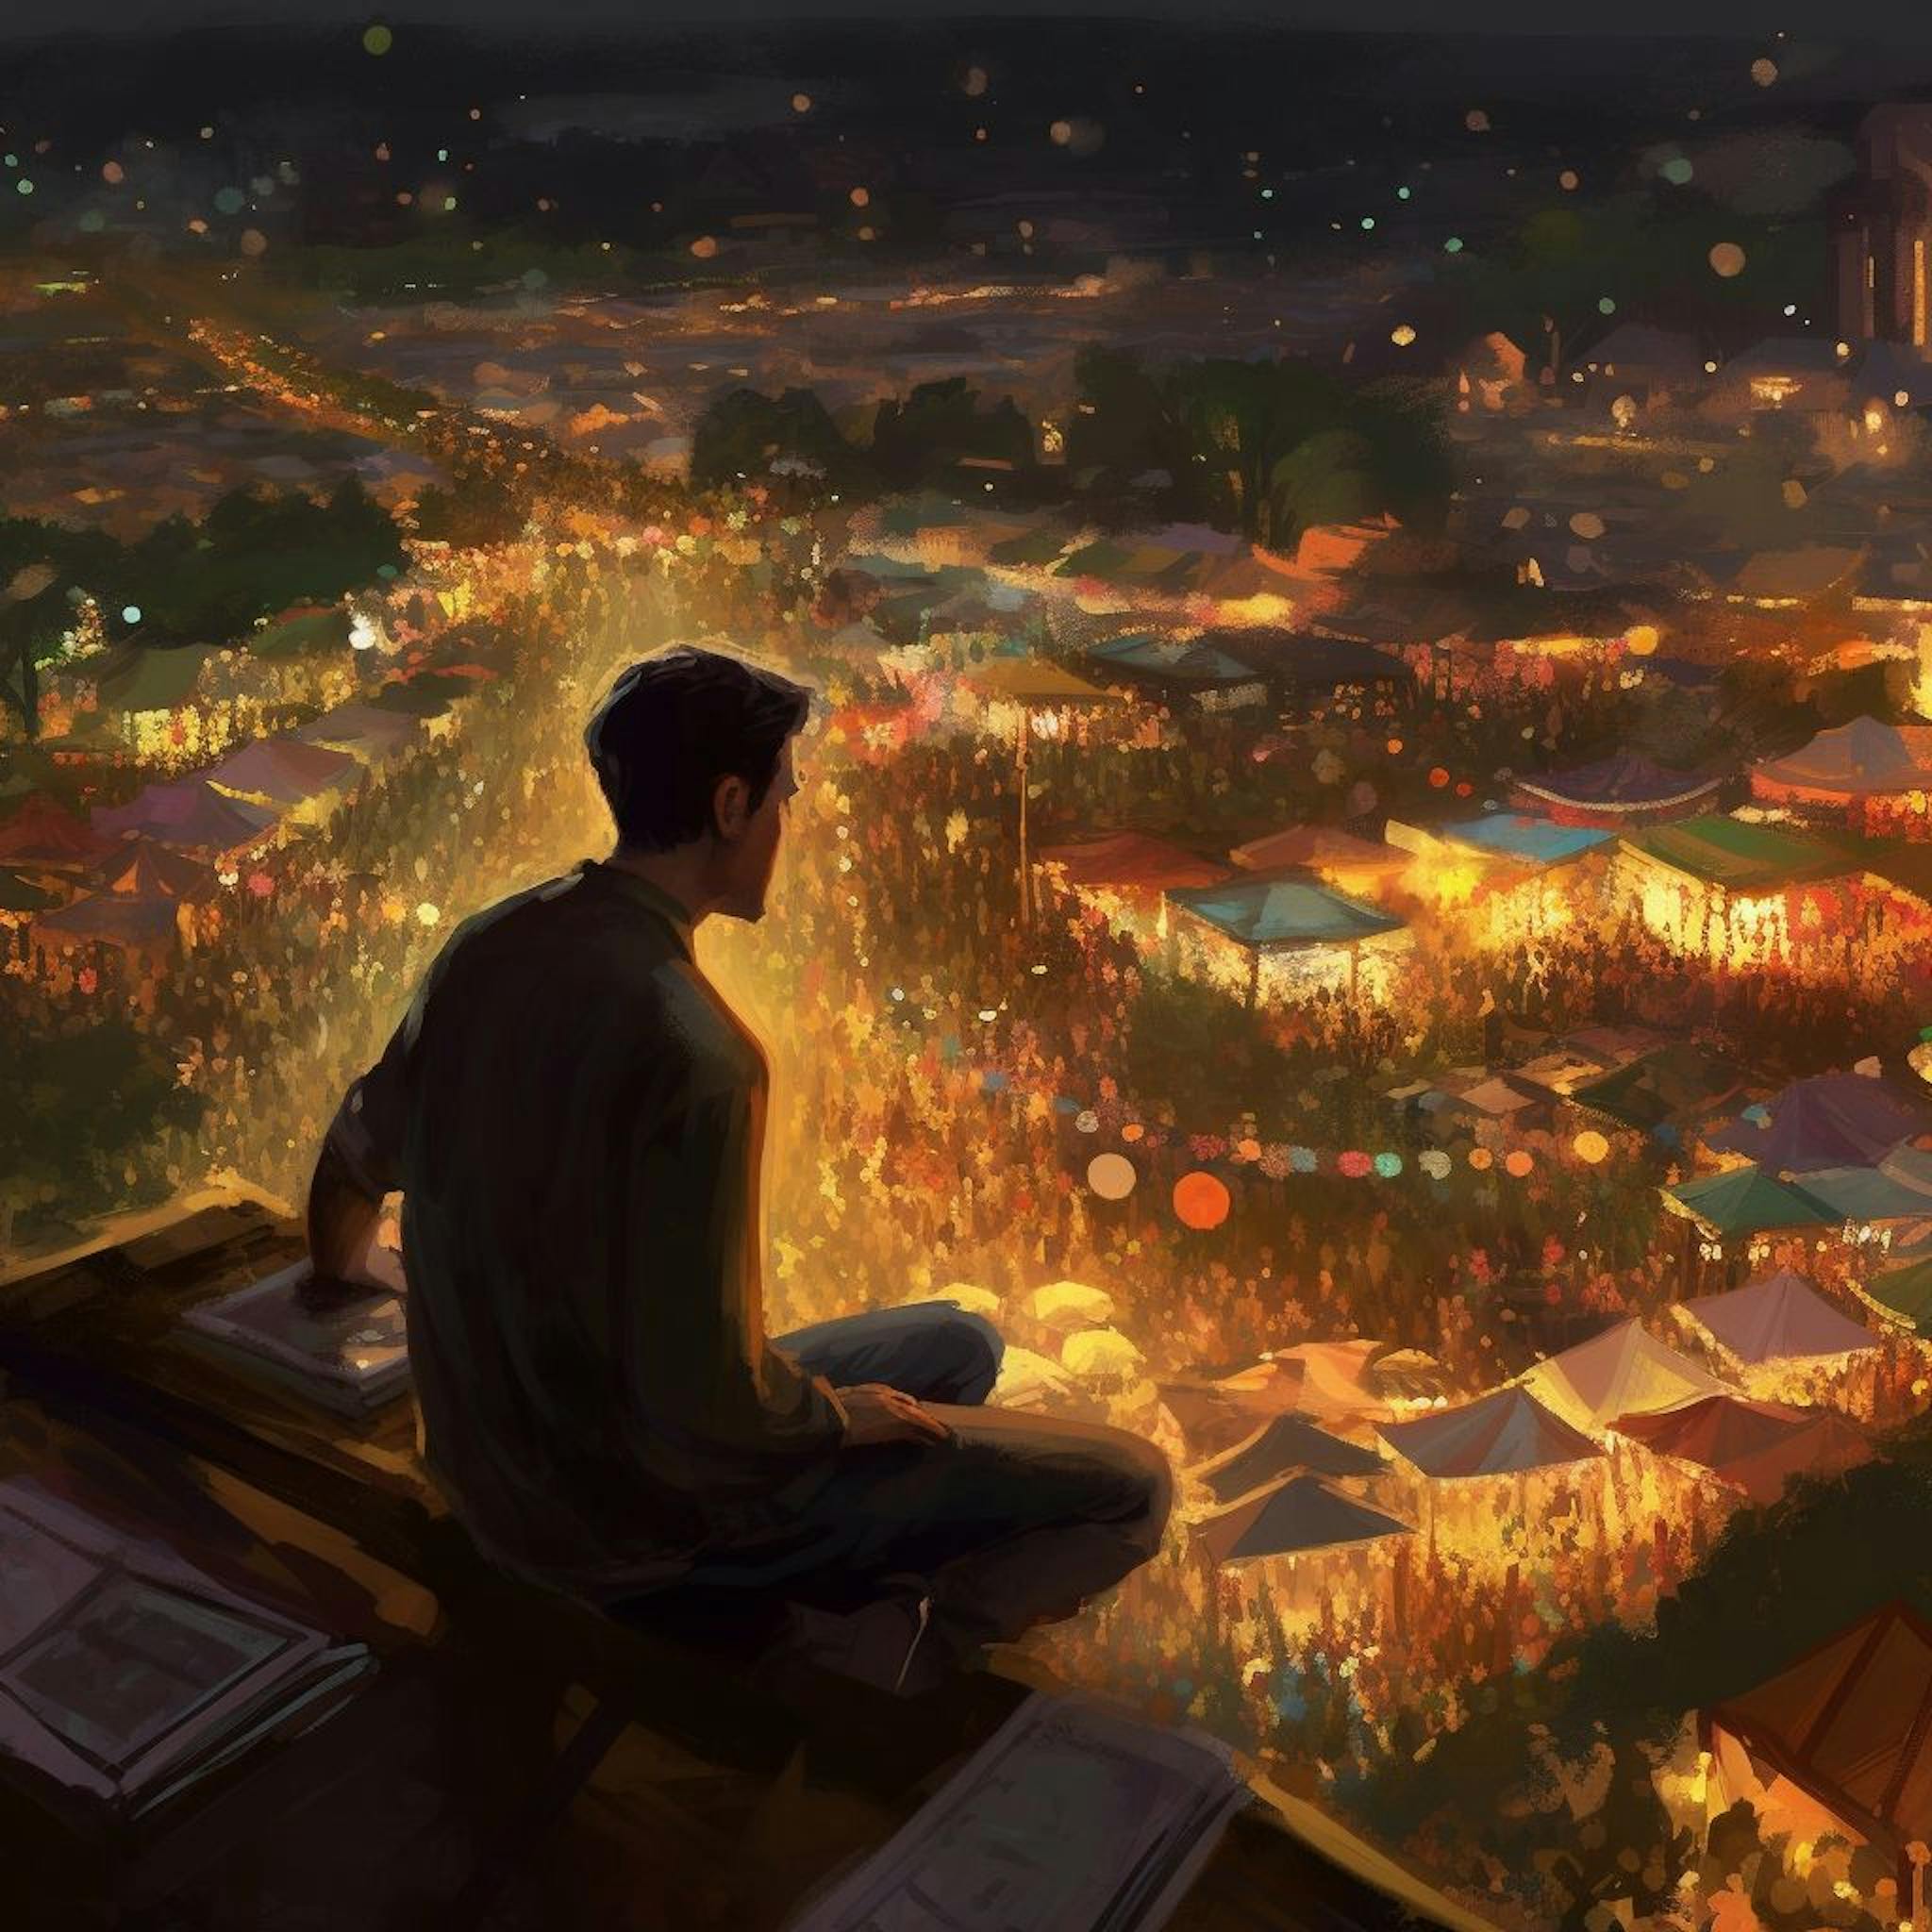 Midjourney v5: “painterly illustration of a lonely person in the foreground looking down onto an imaginative fantasy festival below”